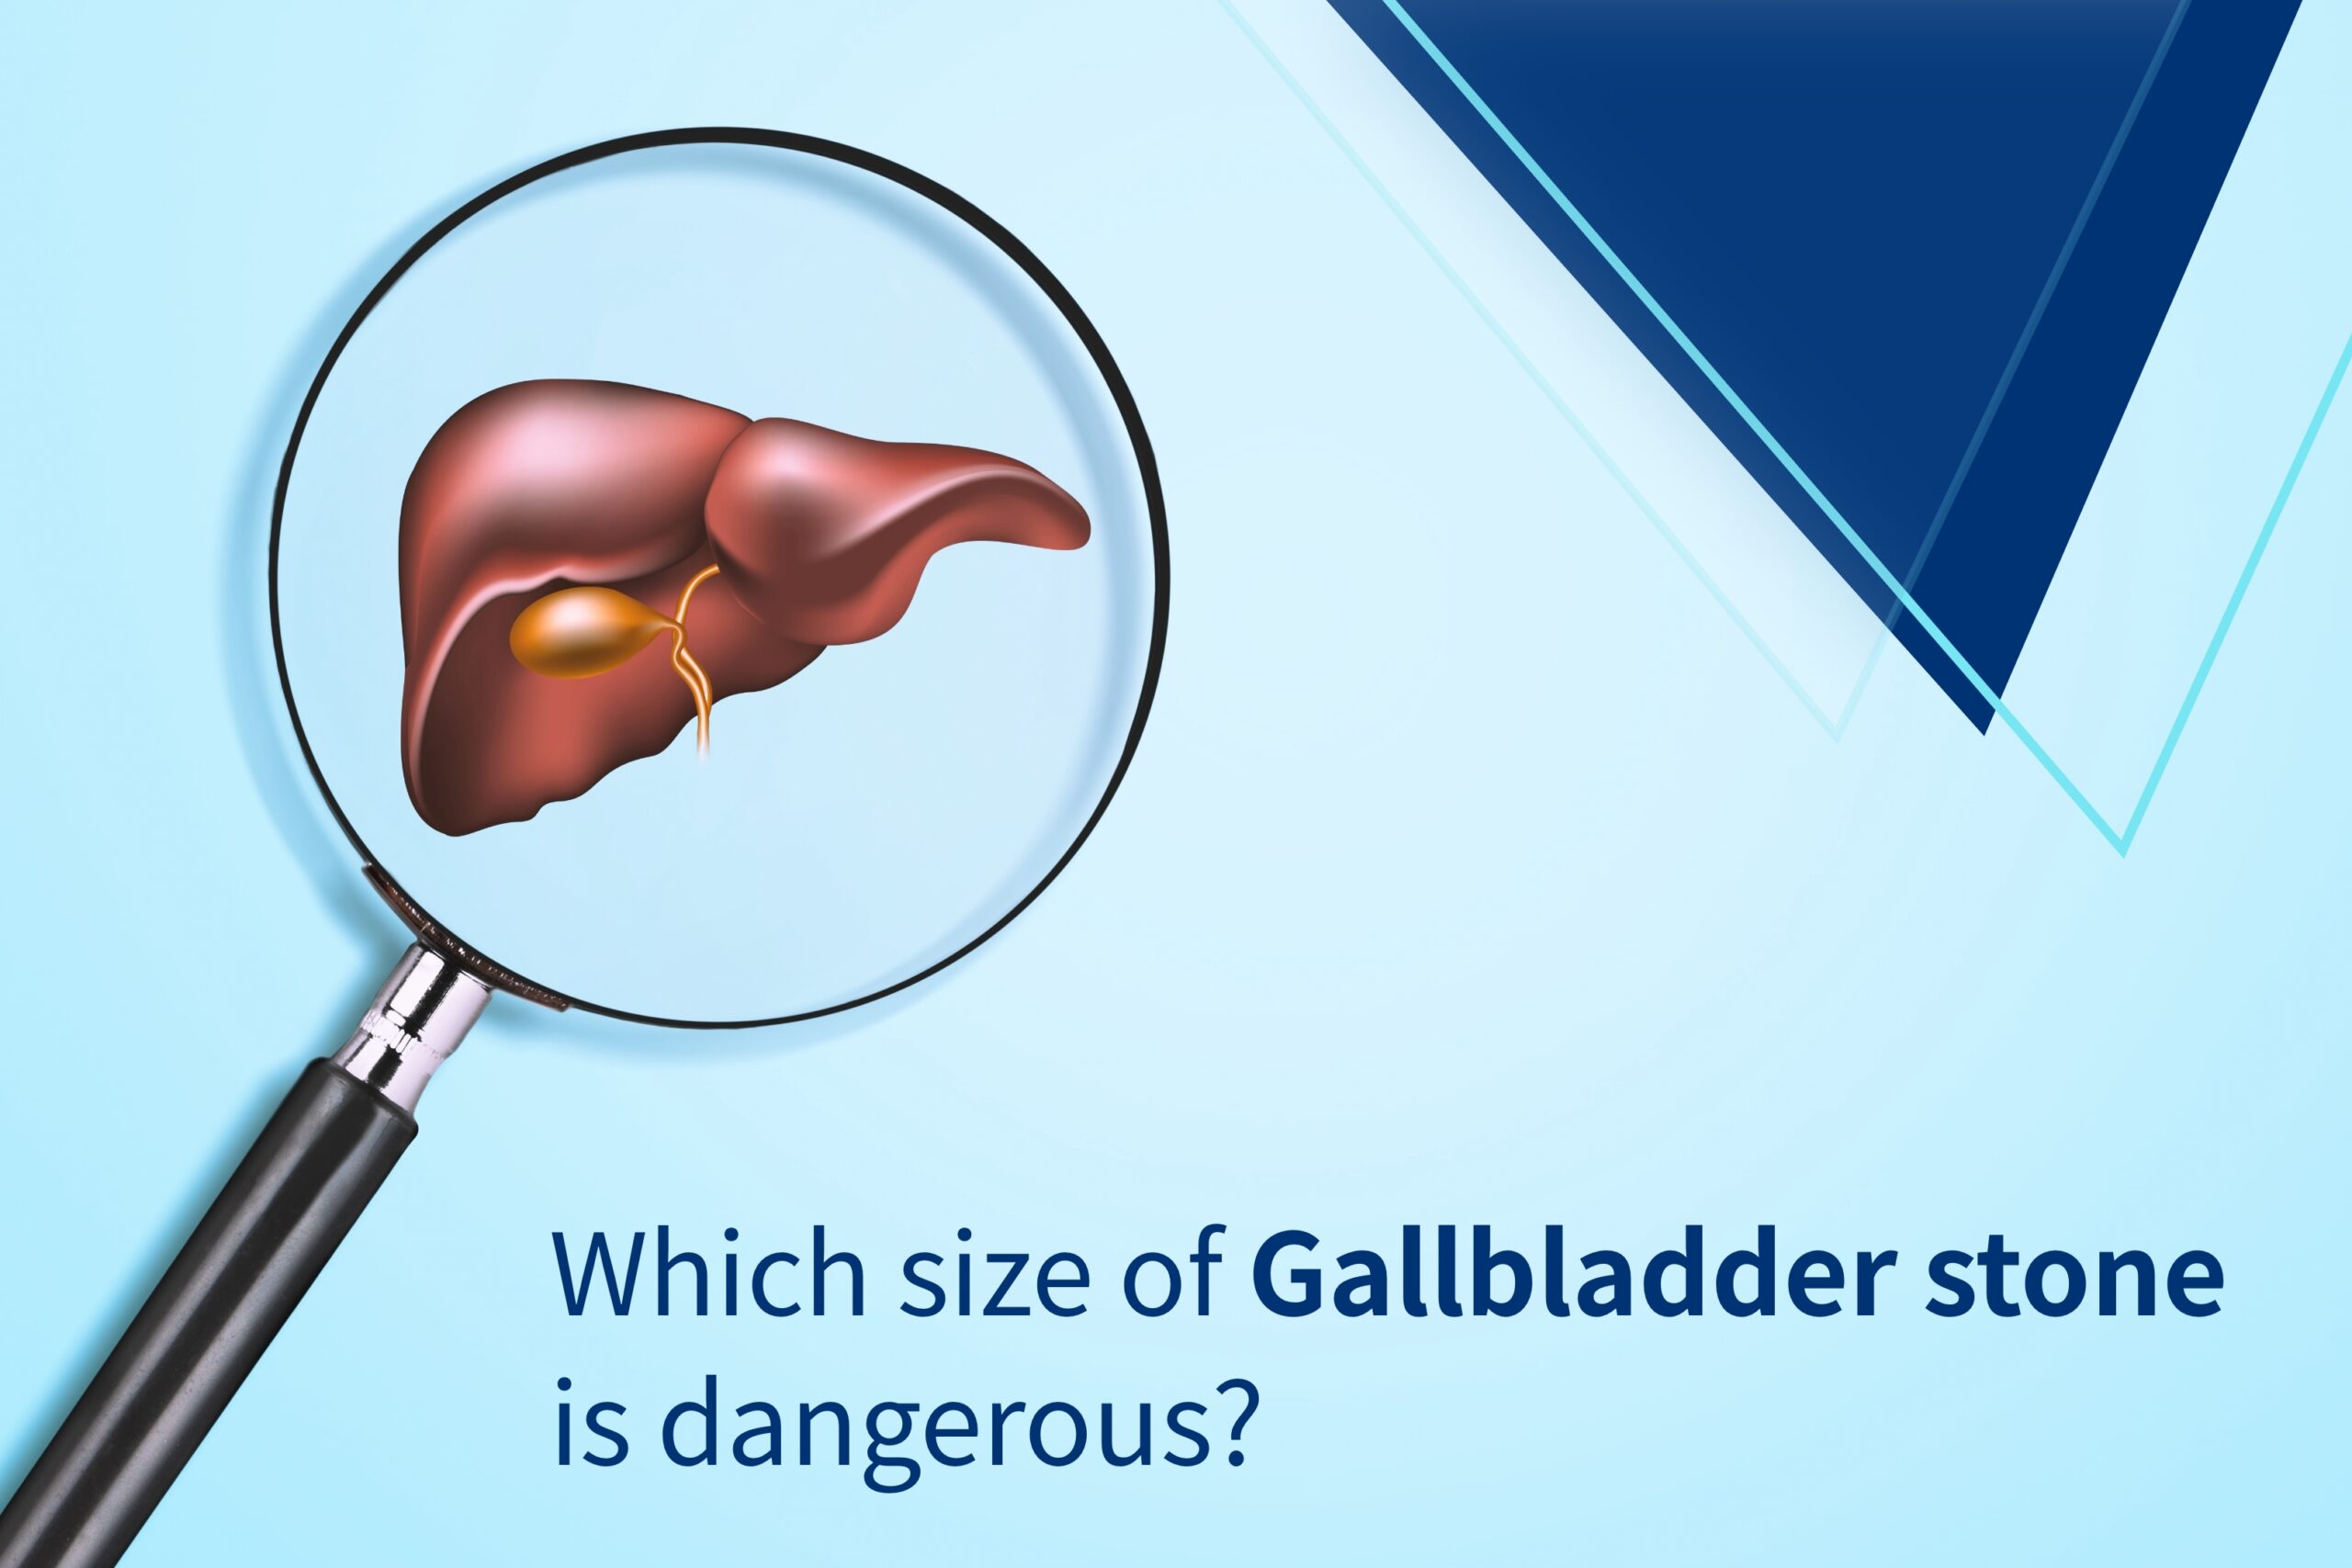 which size of gallbladder stone is dangerous